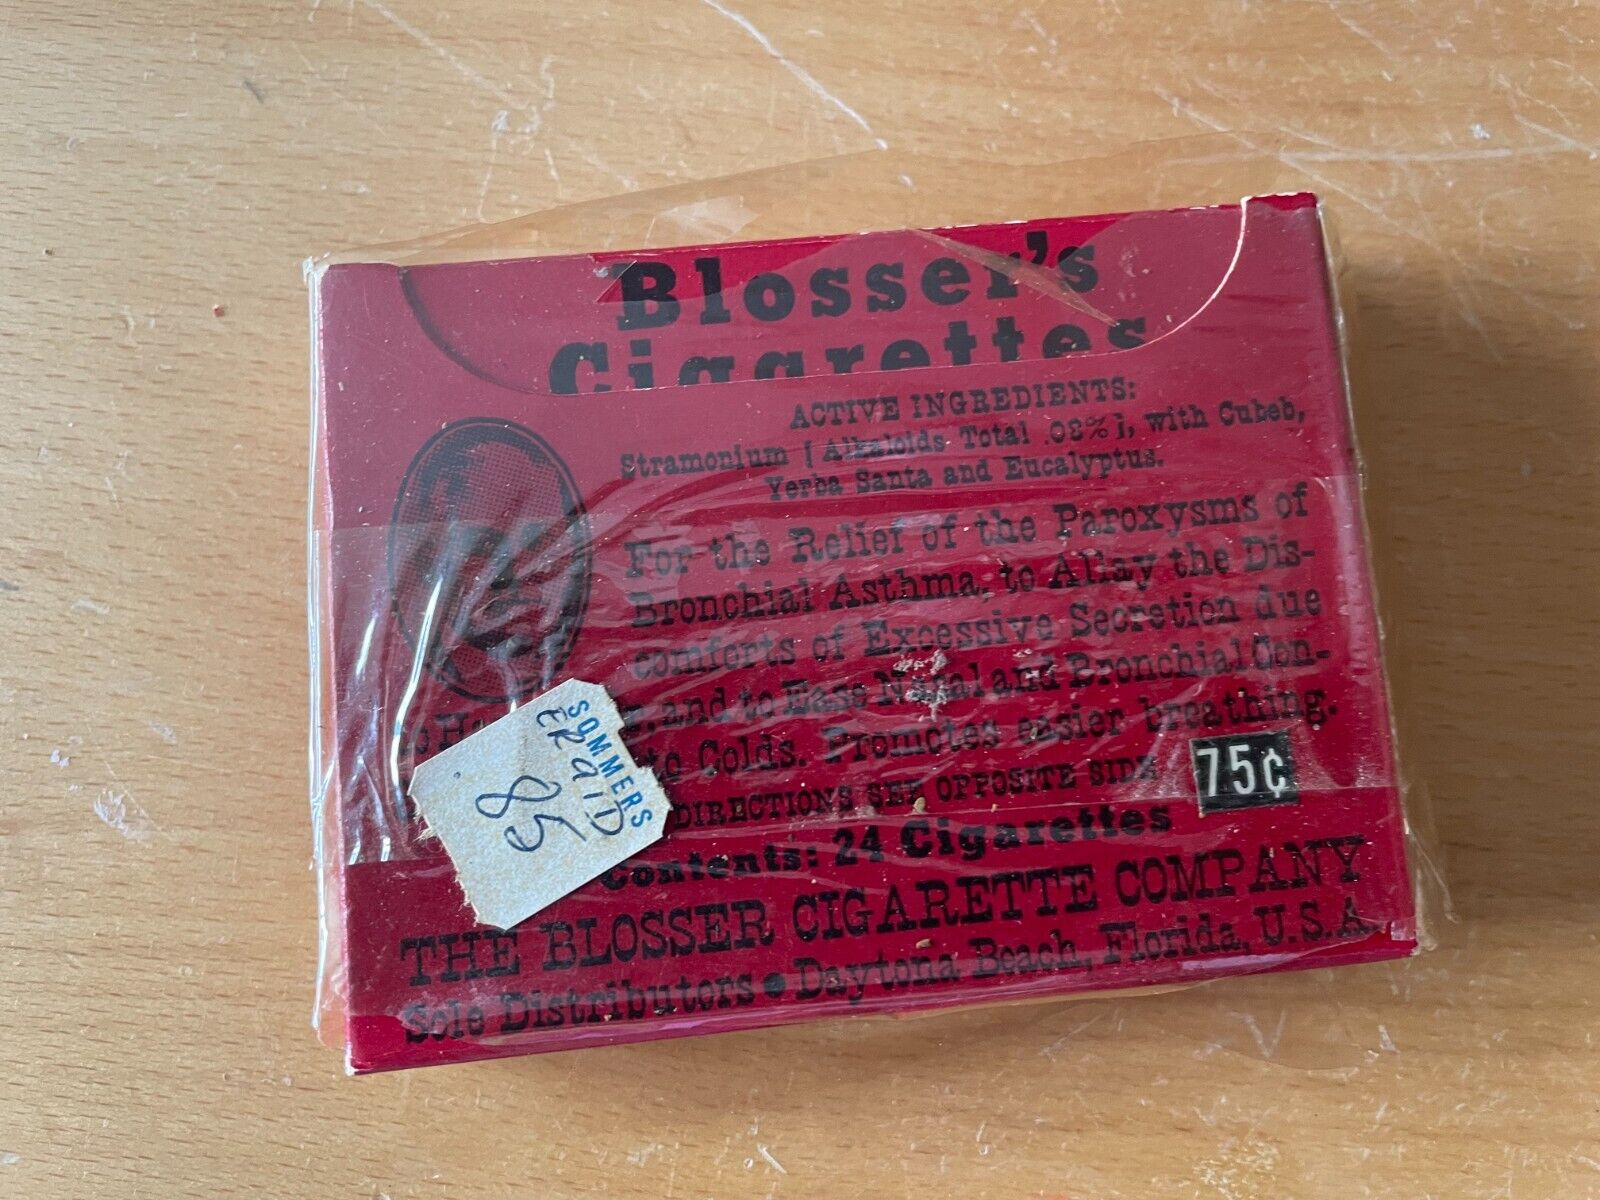 Medical Quack: Blosser's Cigarettes For Asthma, Hay Fever Cures All Full Package